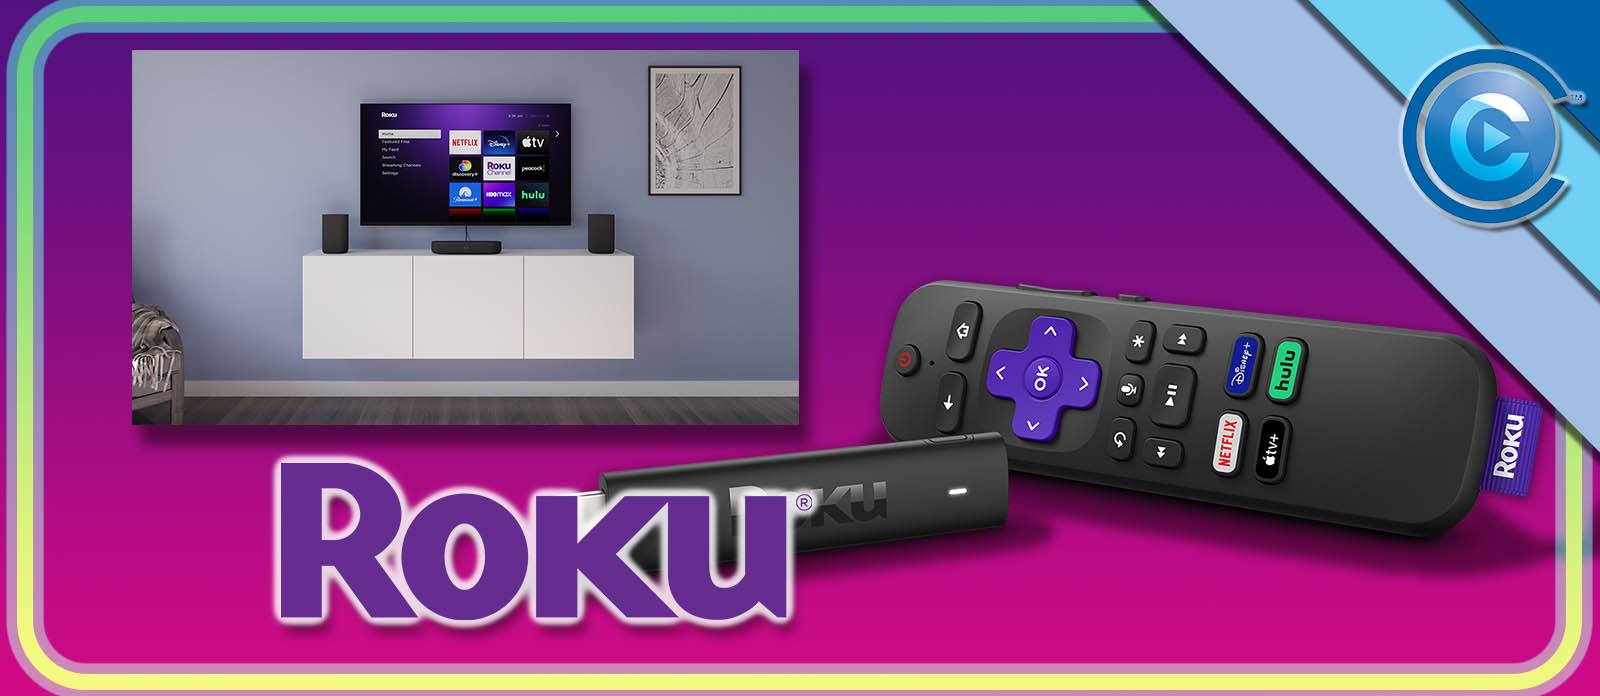 Collage of upcoming Roku products and the Roku logo